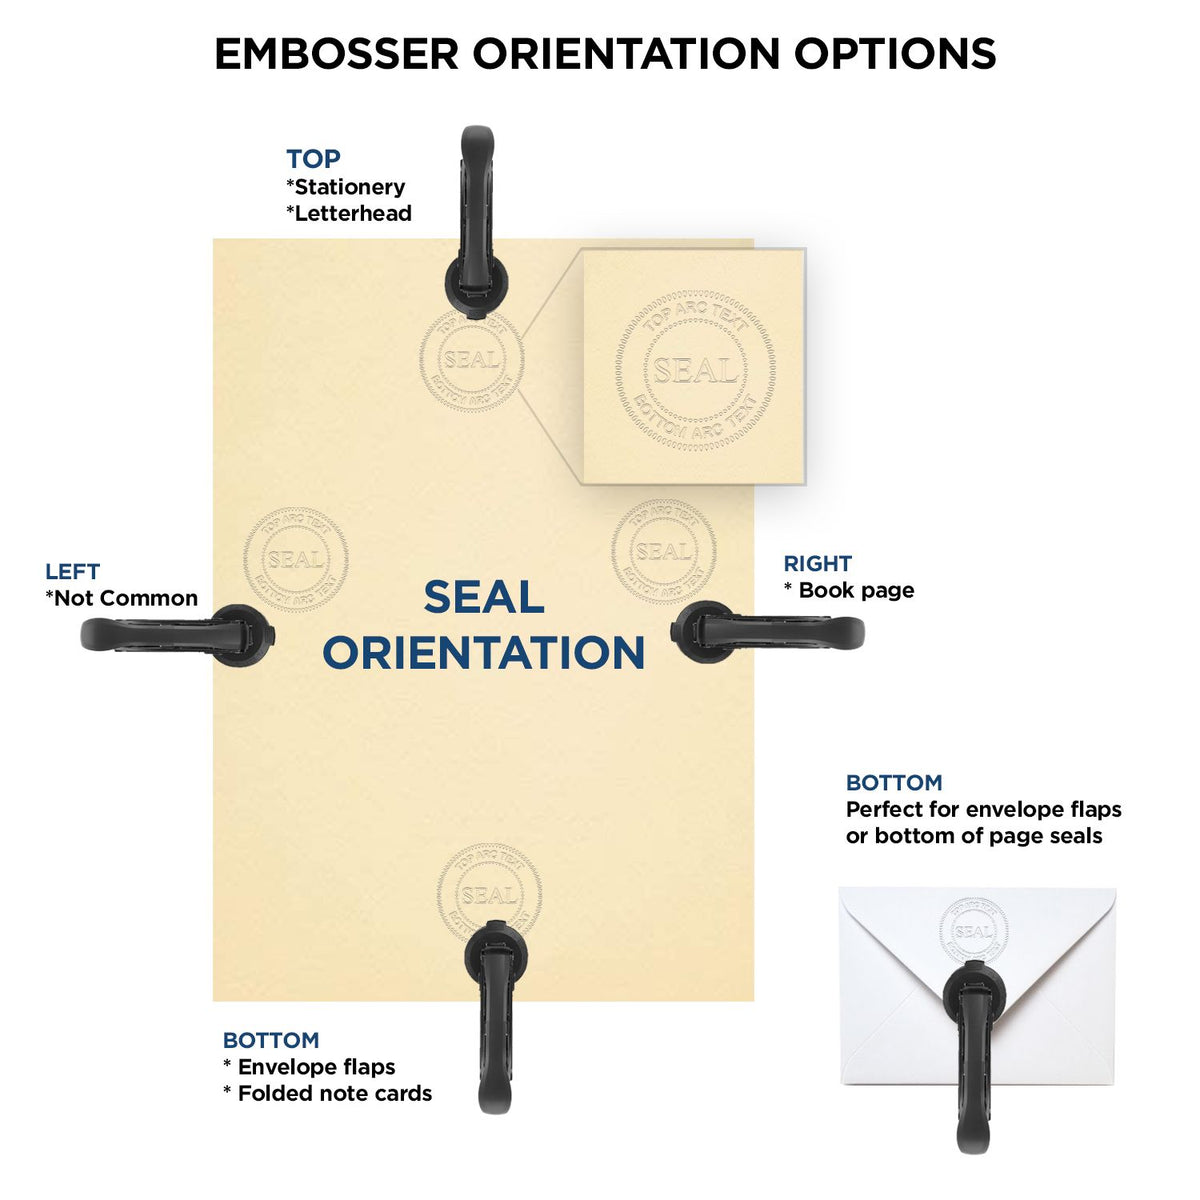 An infographic for the Gift New Hampshire Land Surveyor Seal showing embosser orientation, this is showing examples of a top, bottom, right and left insert.